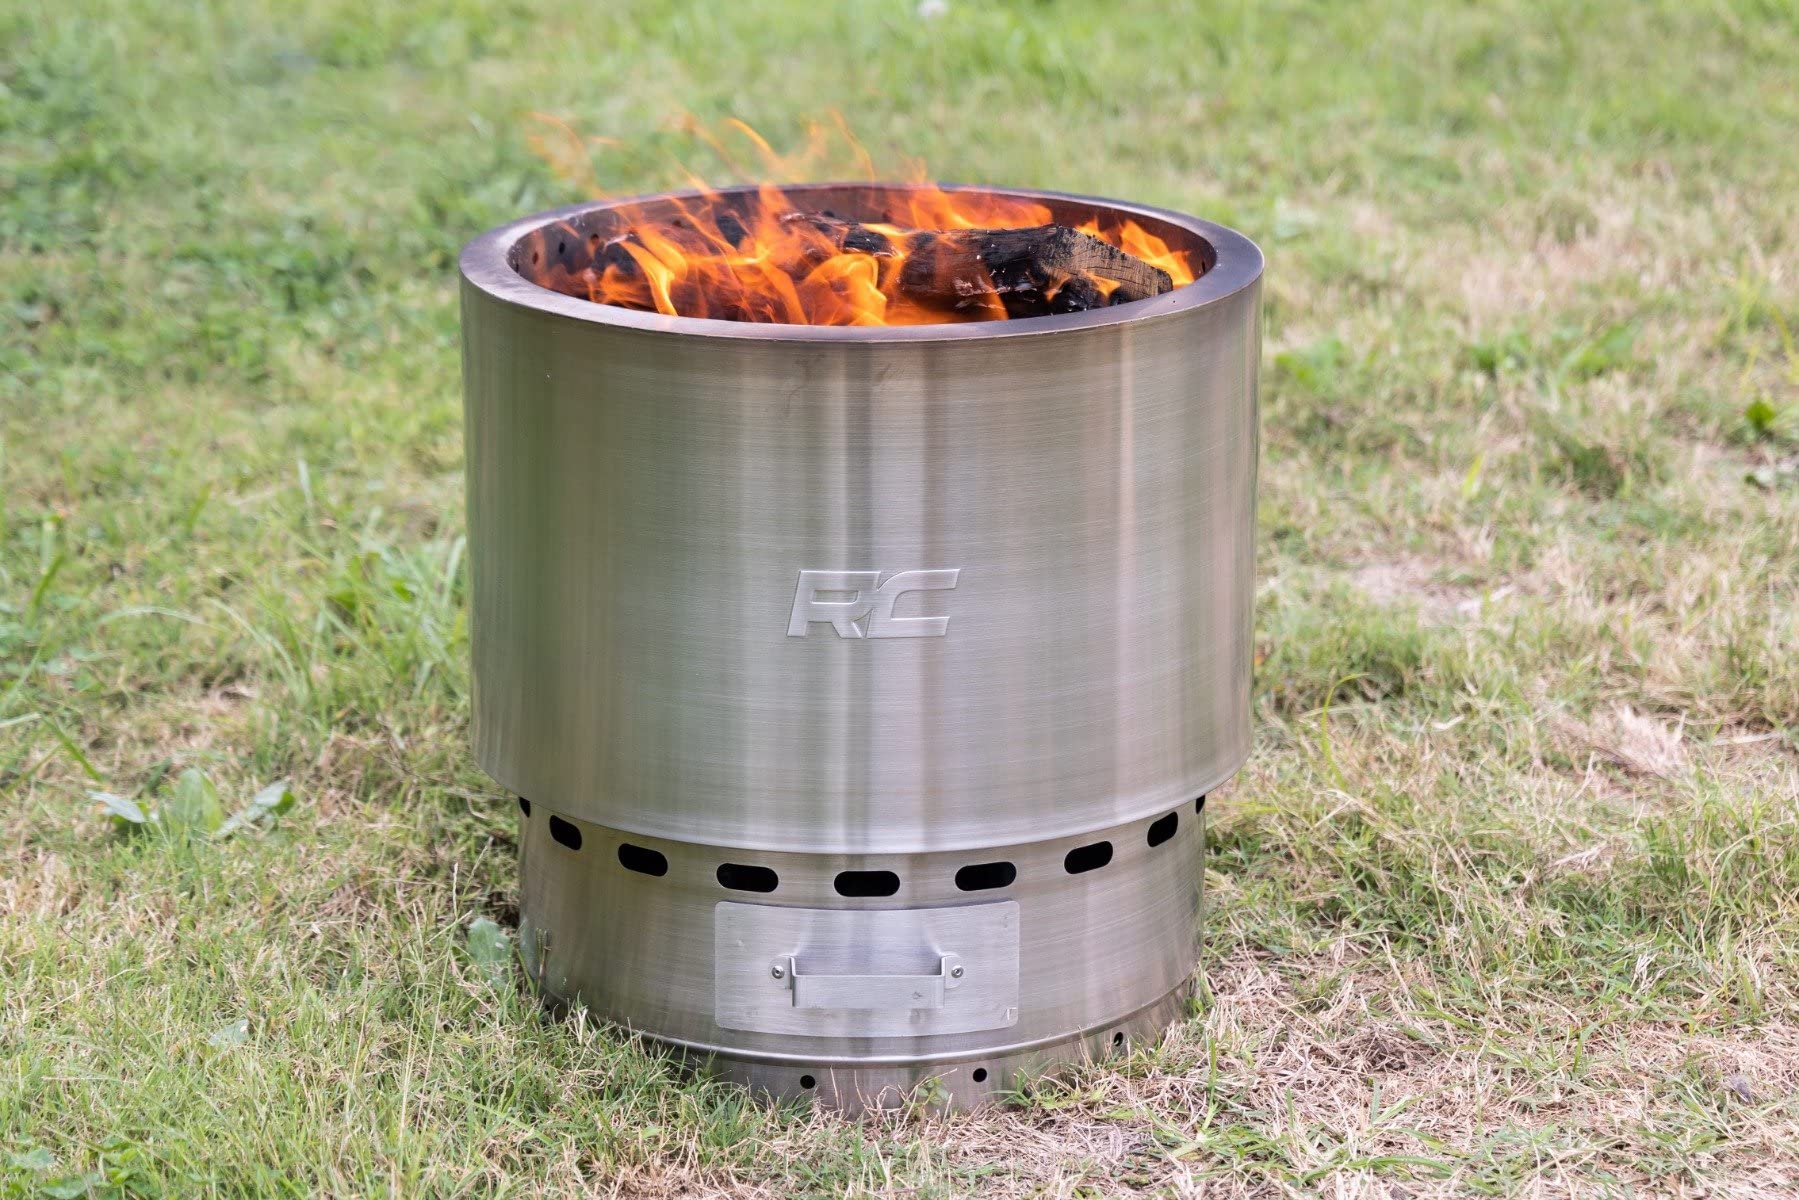 Rough Country Stainless Steel Smokeless Fire Pit w/Carry Bag - 117515